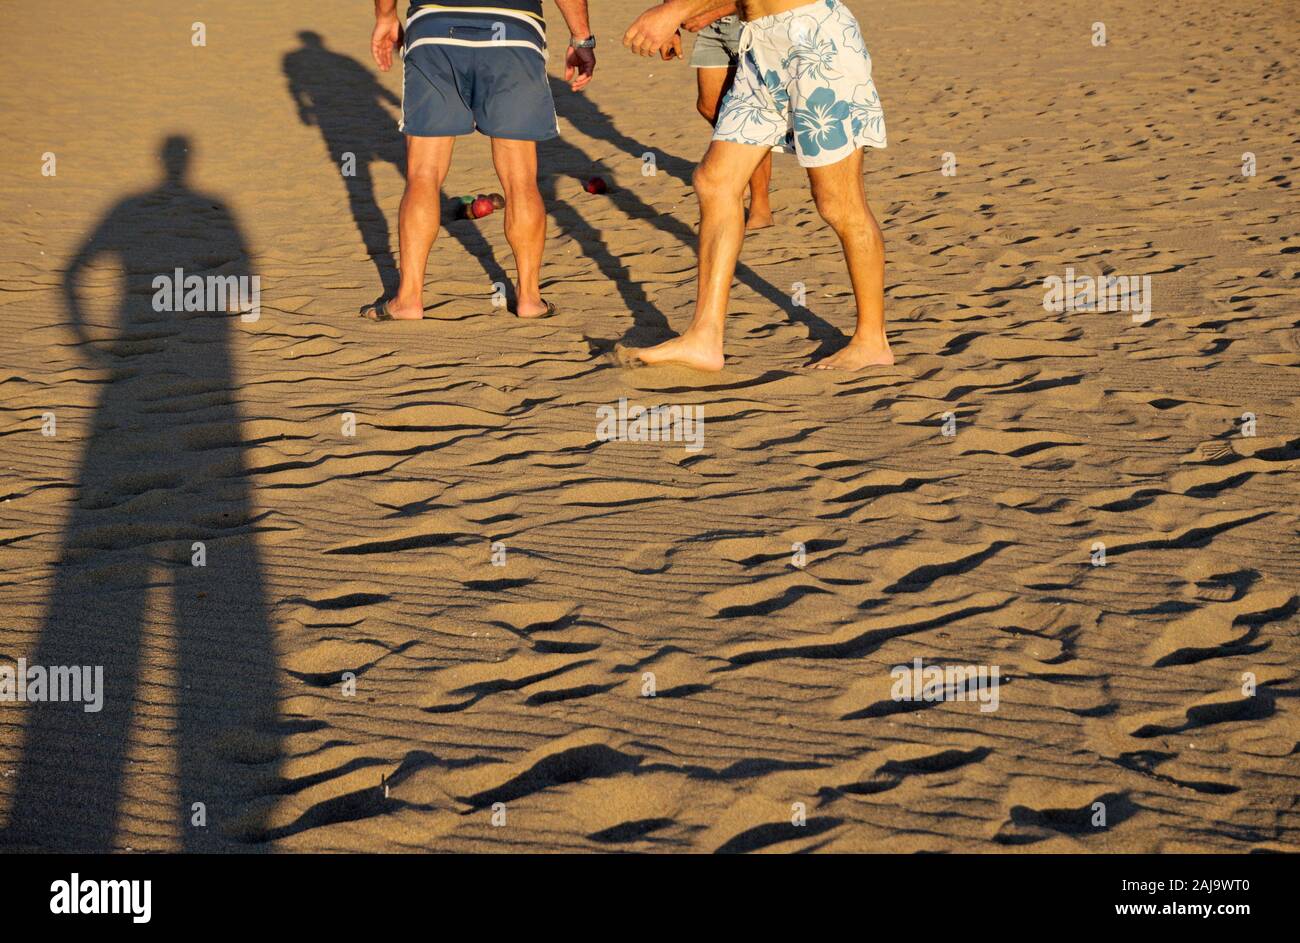 Men playing bocce ball game on sandy beach in Italy Stock Photo